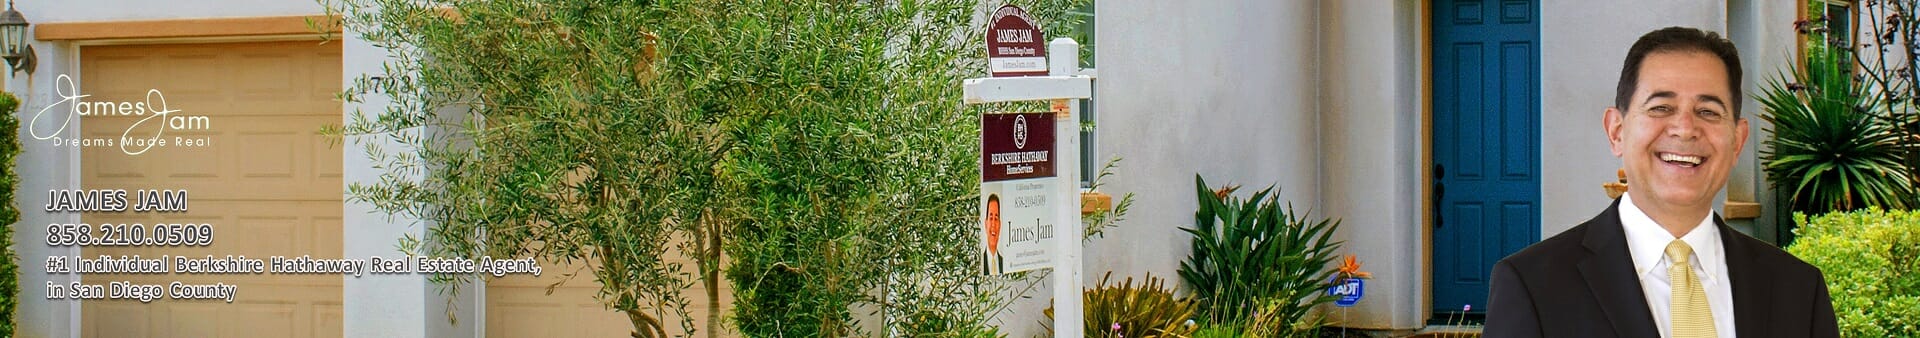 Selling a Home Without an Agent in Carlsbad – Learn How to Sell Fast